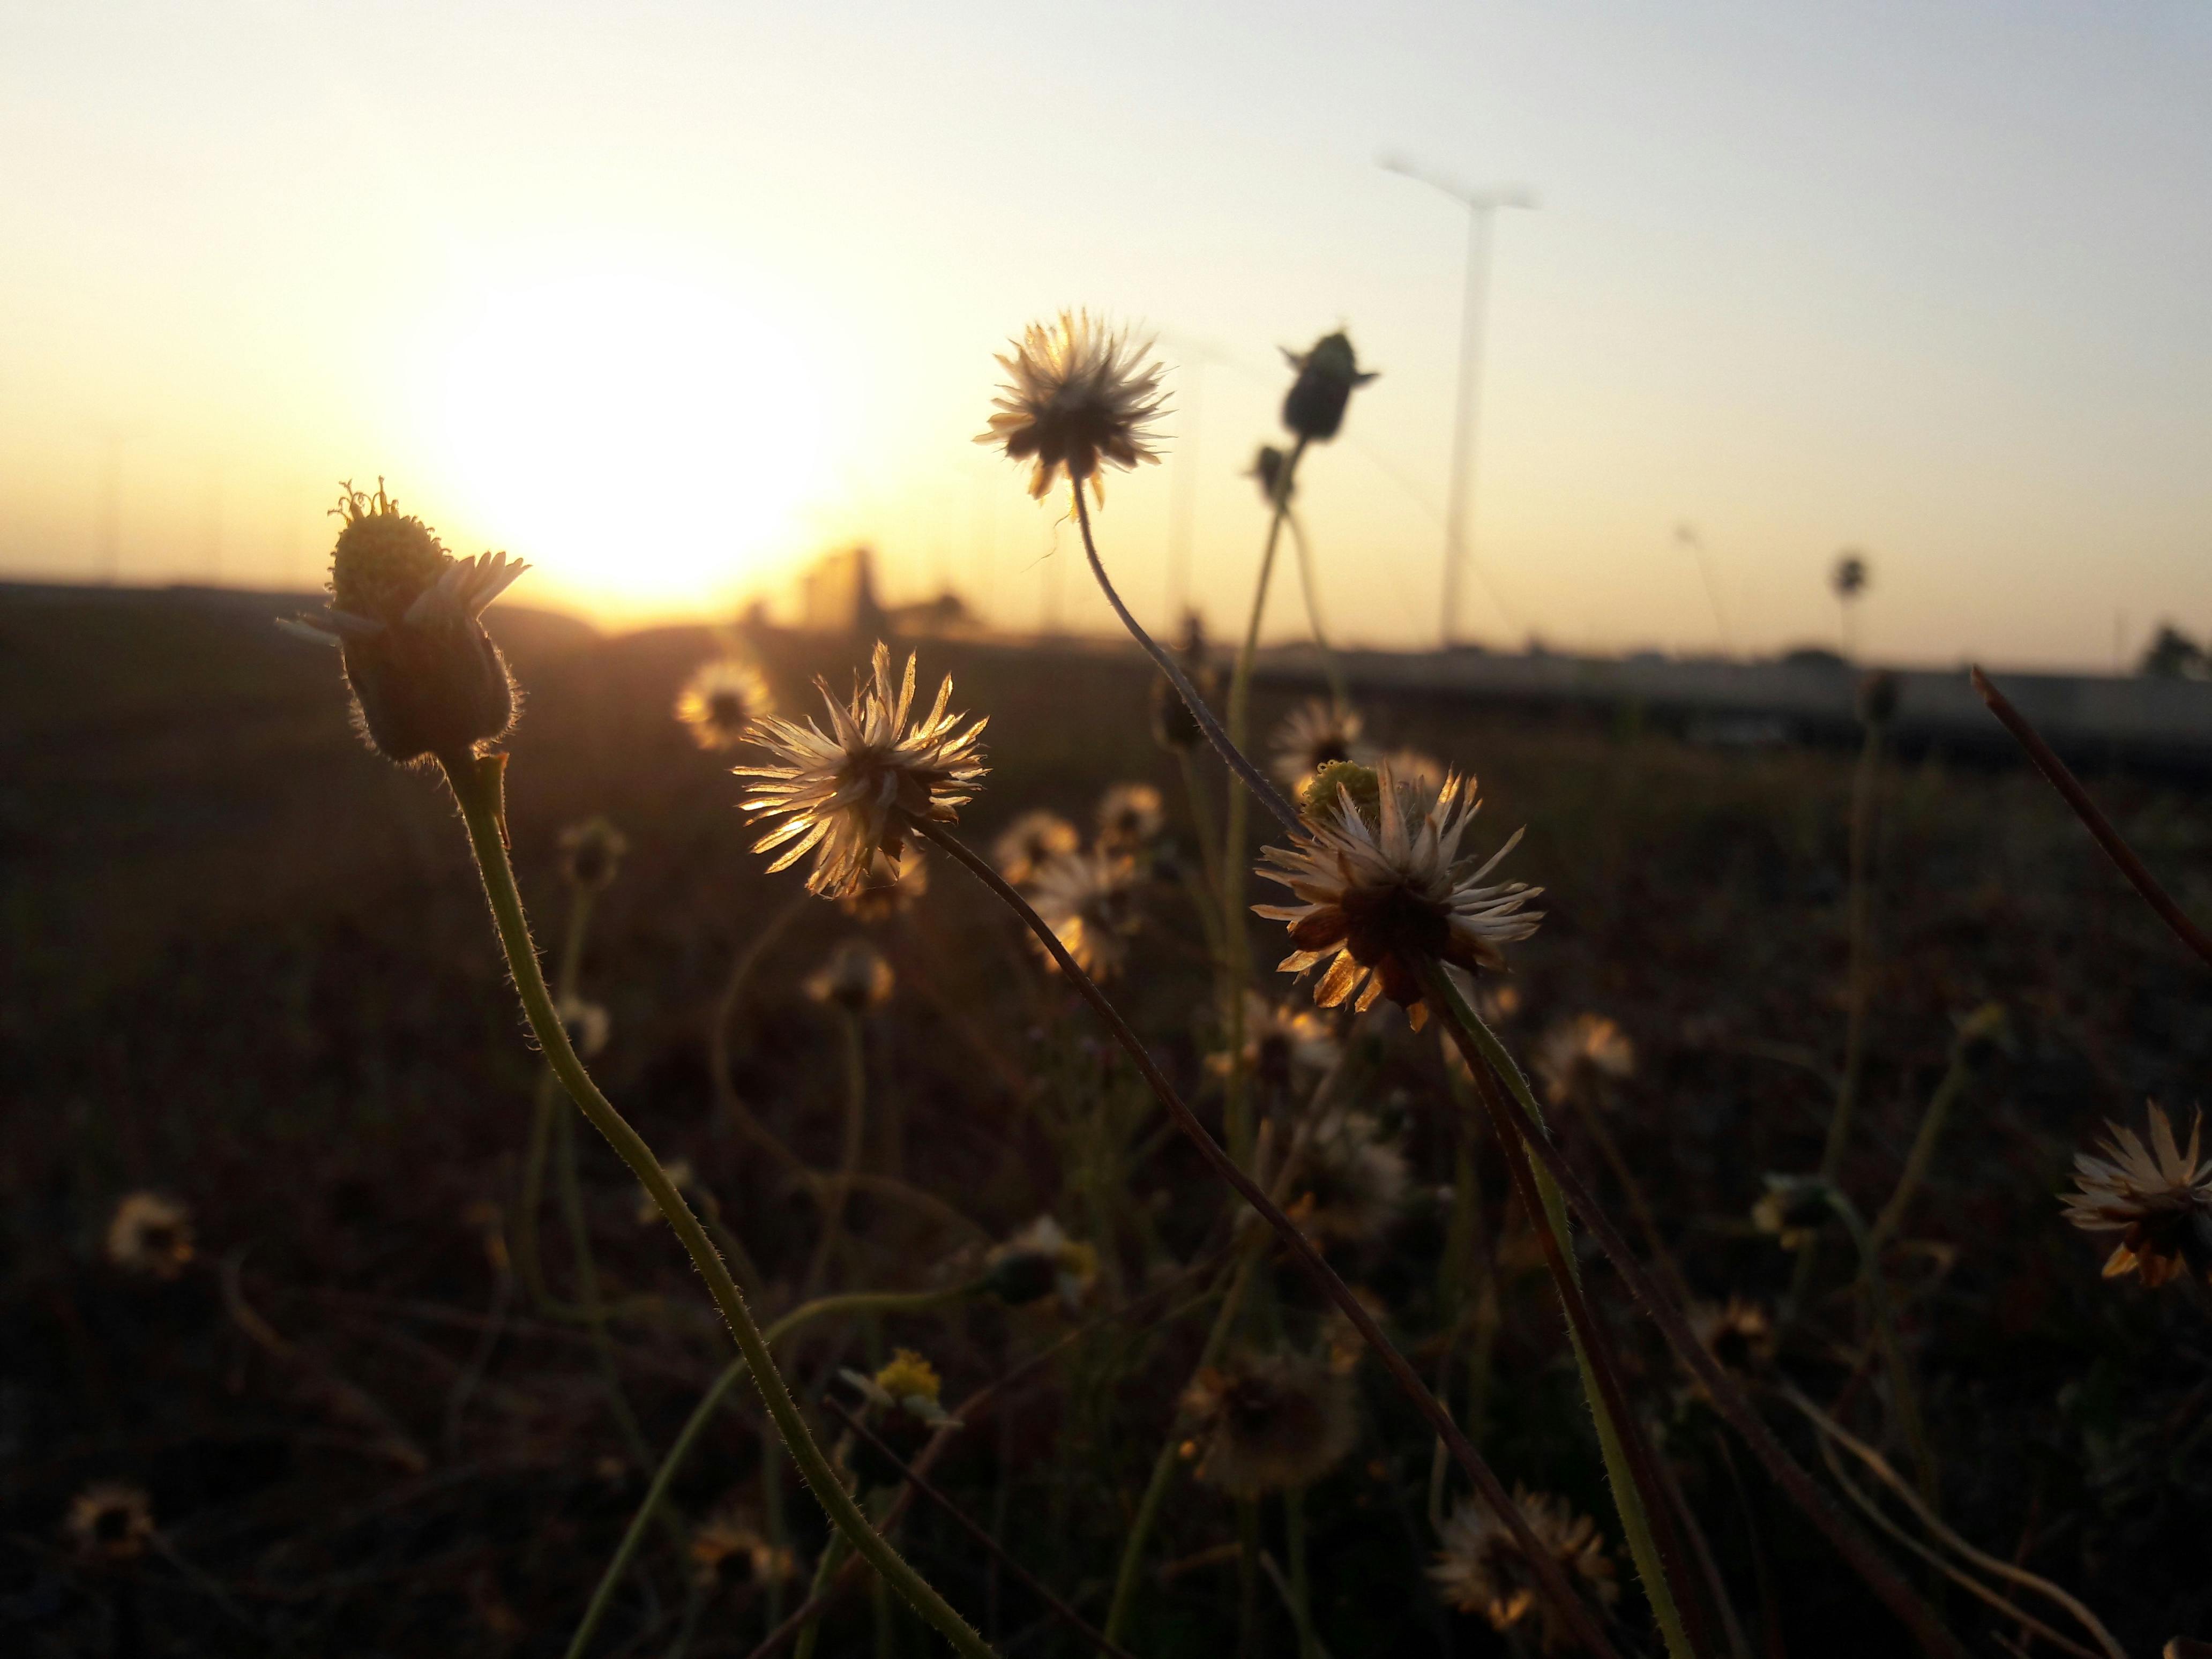 Free stock photo of flower with sun set